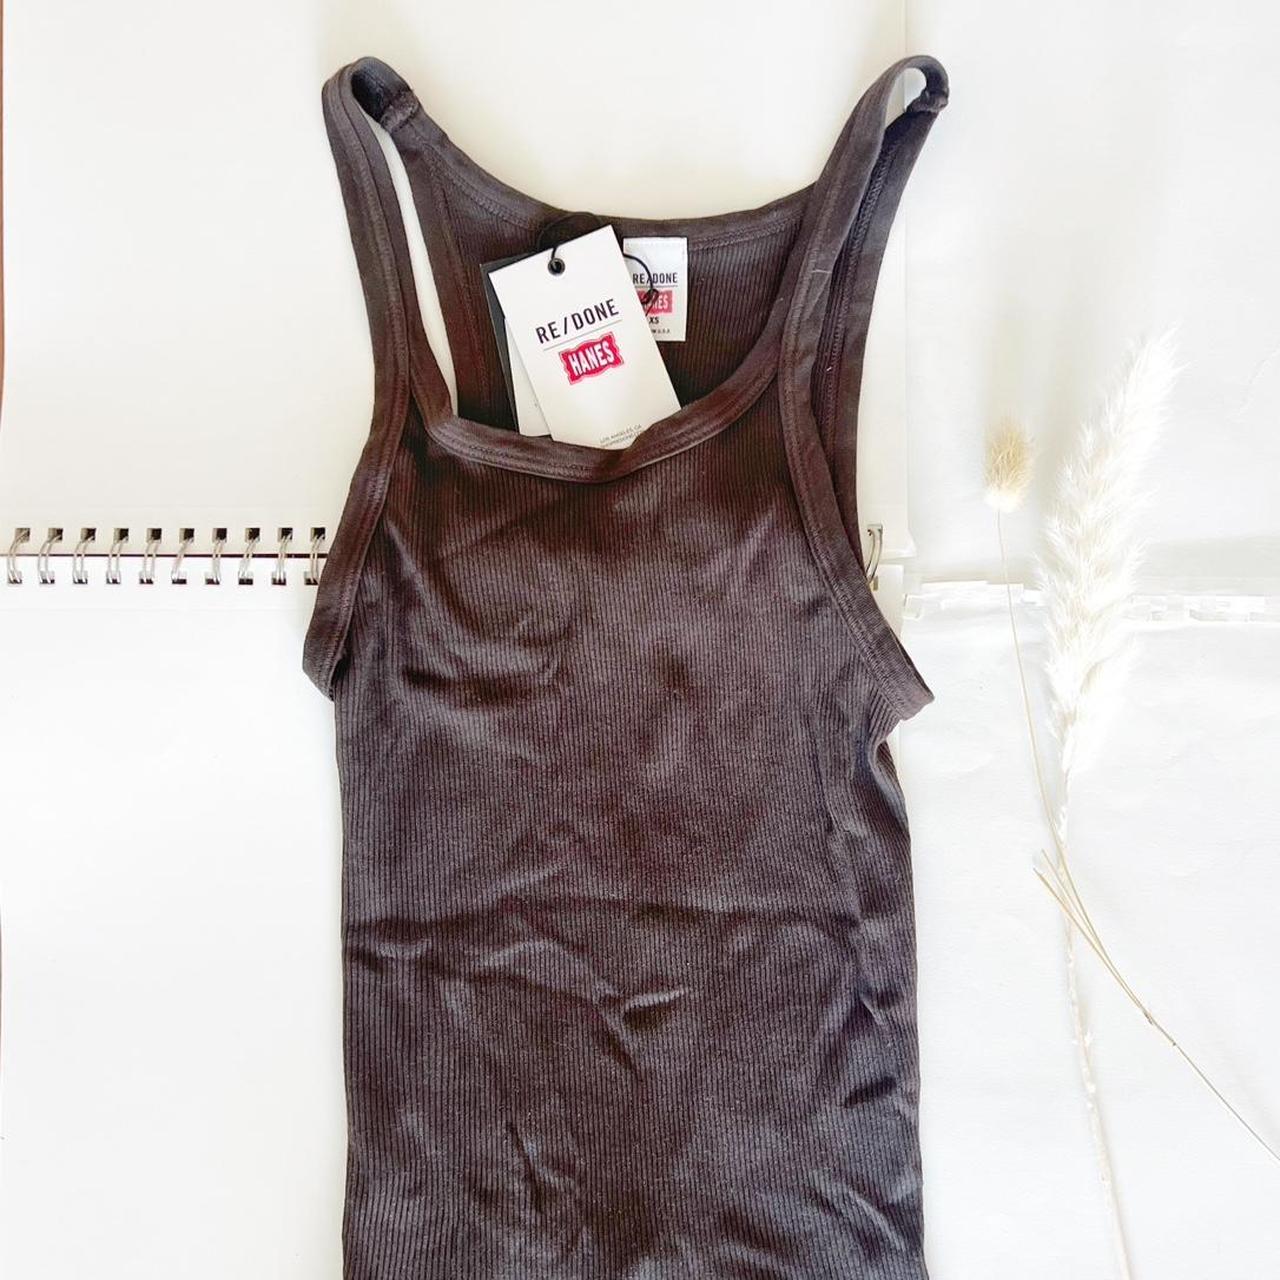 Re/Done Brown Hanes Edition Tank Top Re/Done